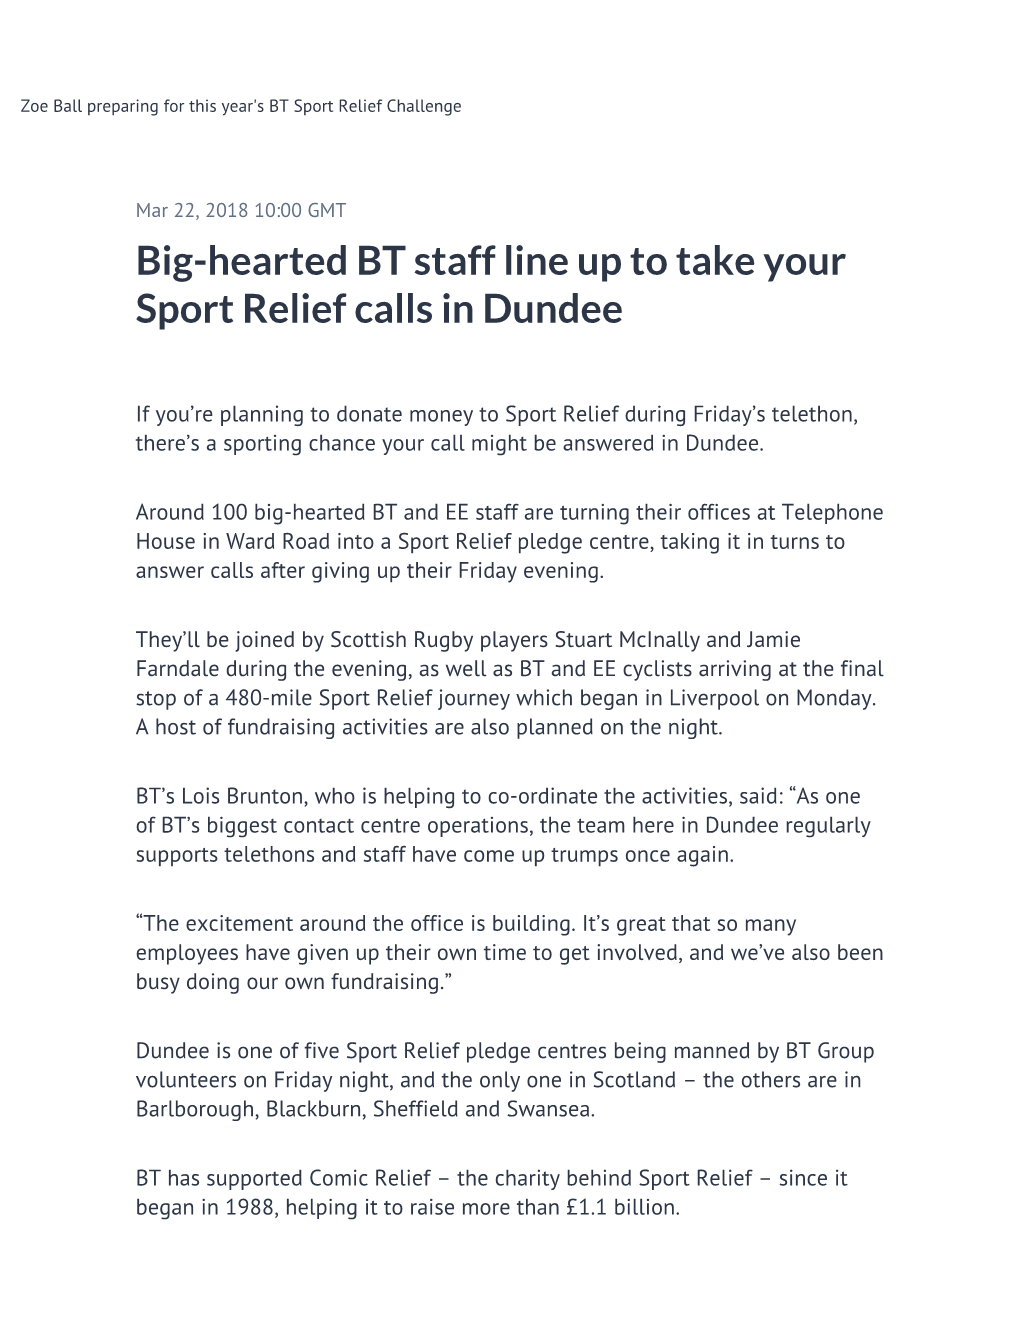 Big-Hearted BT Staff Line up to Take Your Sport Relief Calls in Dundee